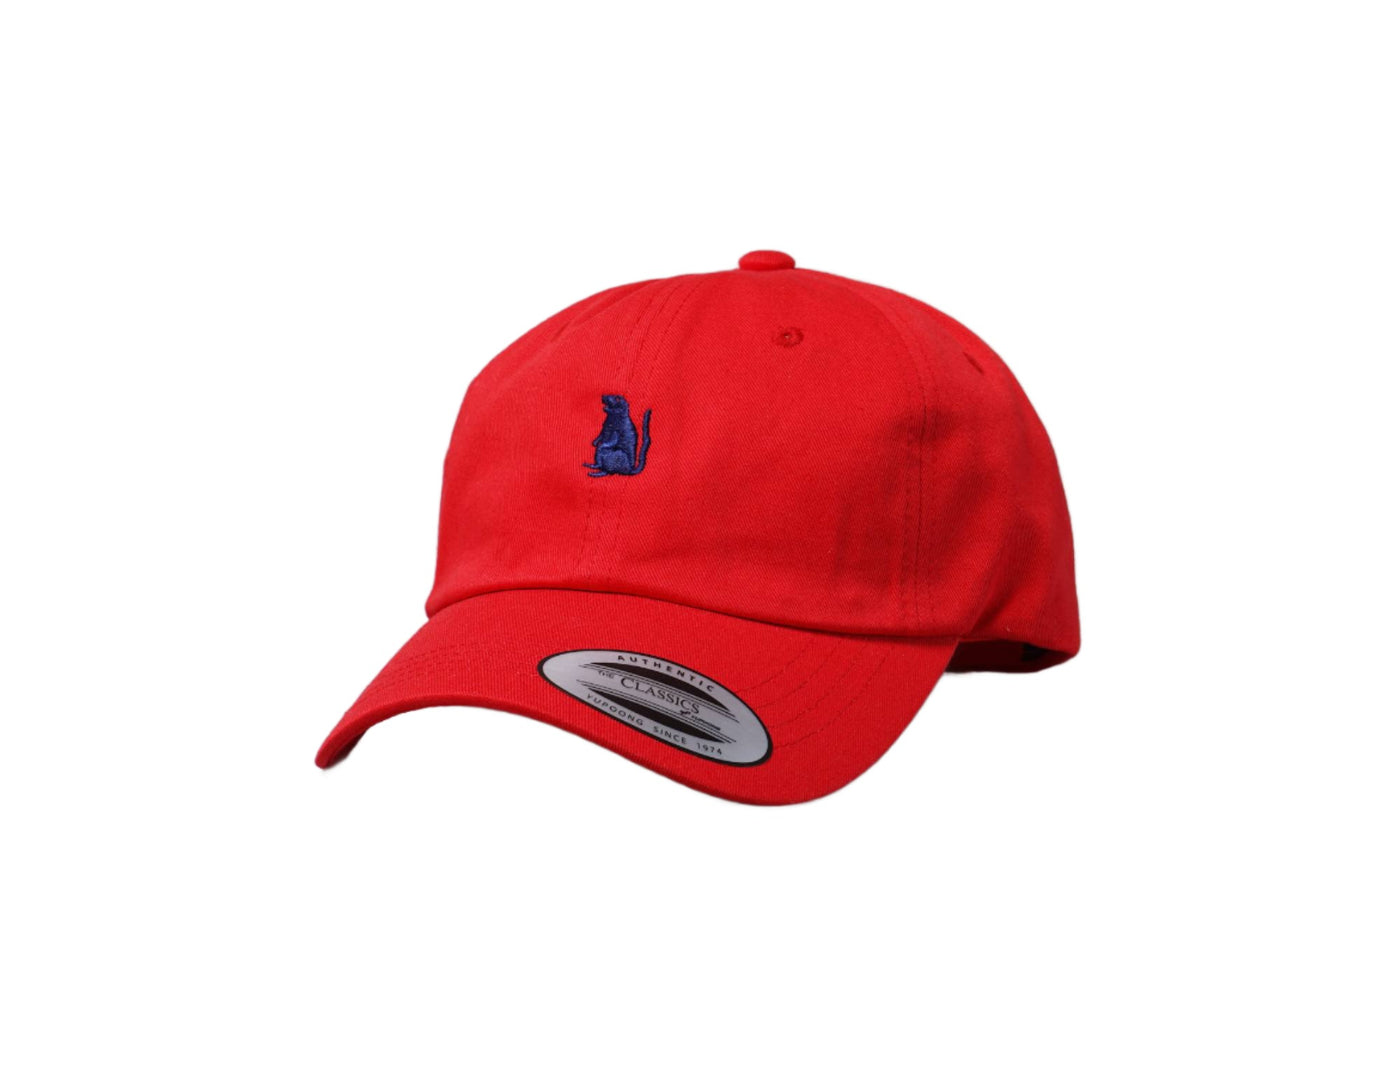 Cap Adjustable Oslo Rats Dad Hat Red/Navy Oslo Rats Adjustable Cap / Red / One Size